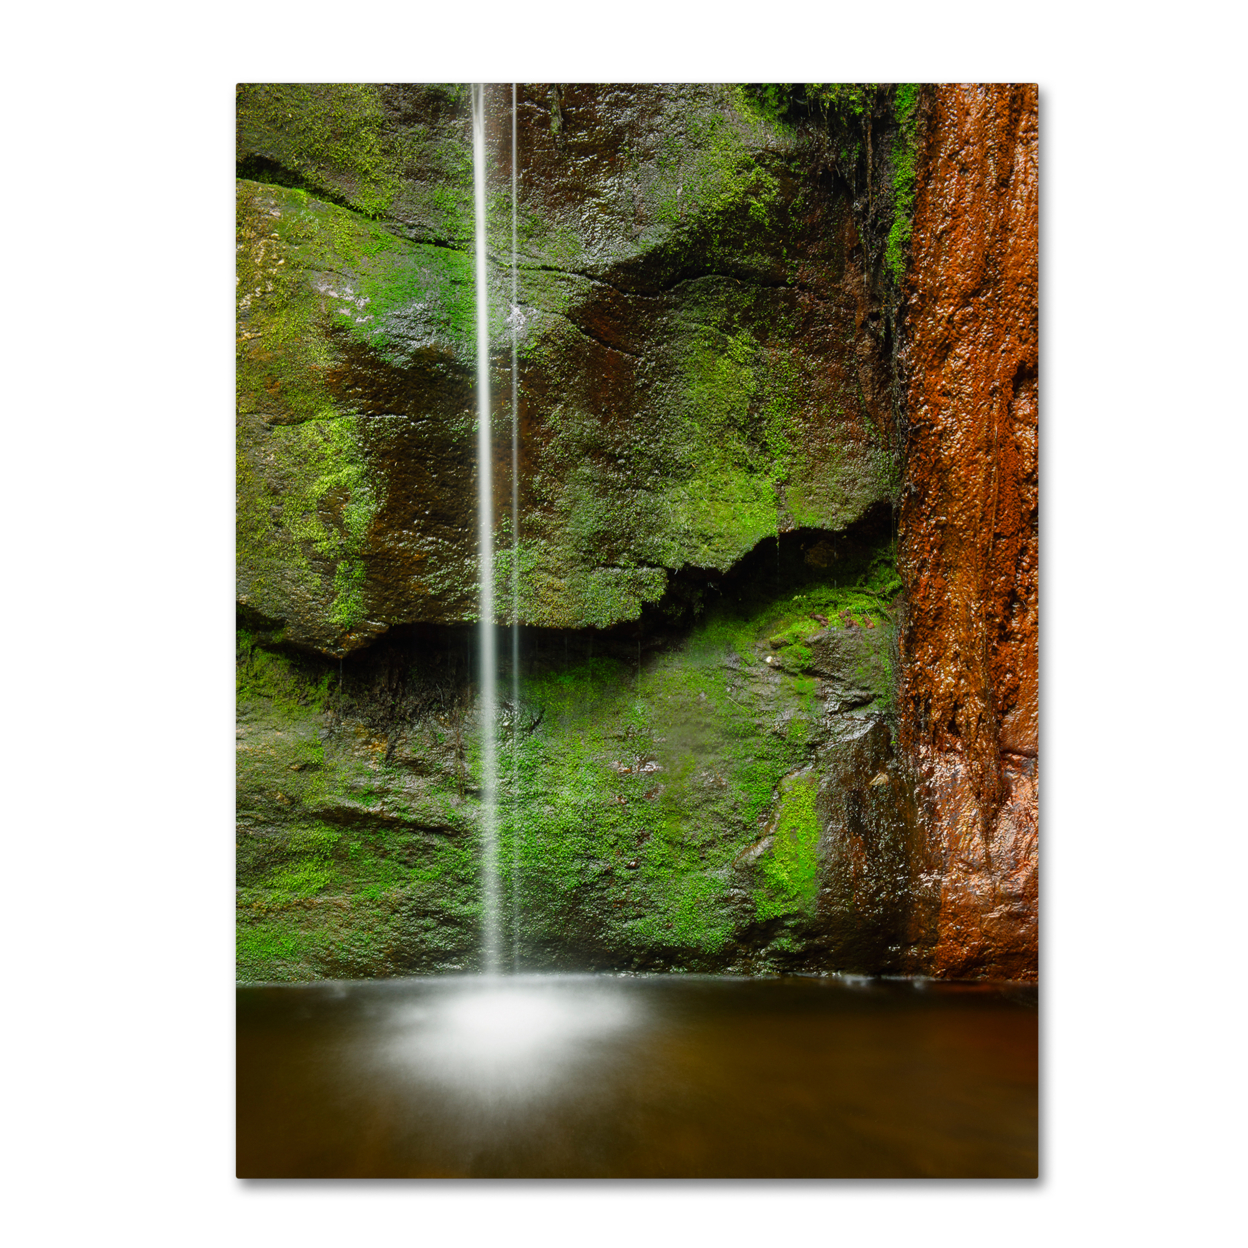 Michael Blanchette Photography 'Moss And Rust' Canvas Wall Art 35 X 47 Inches